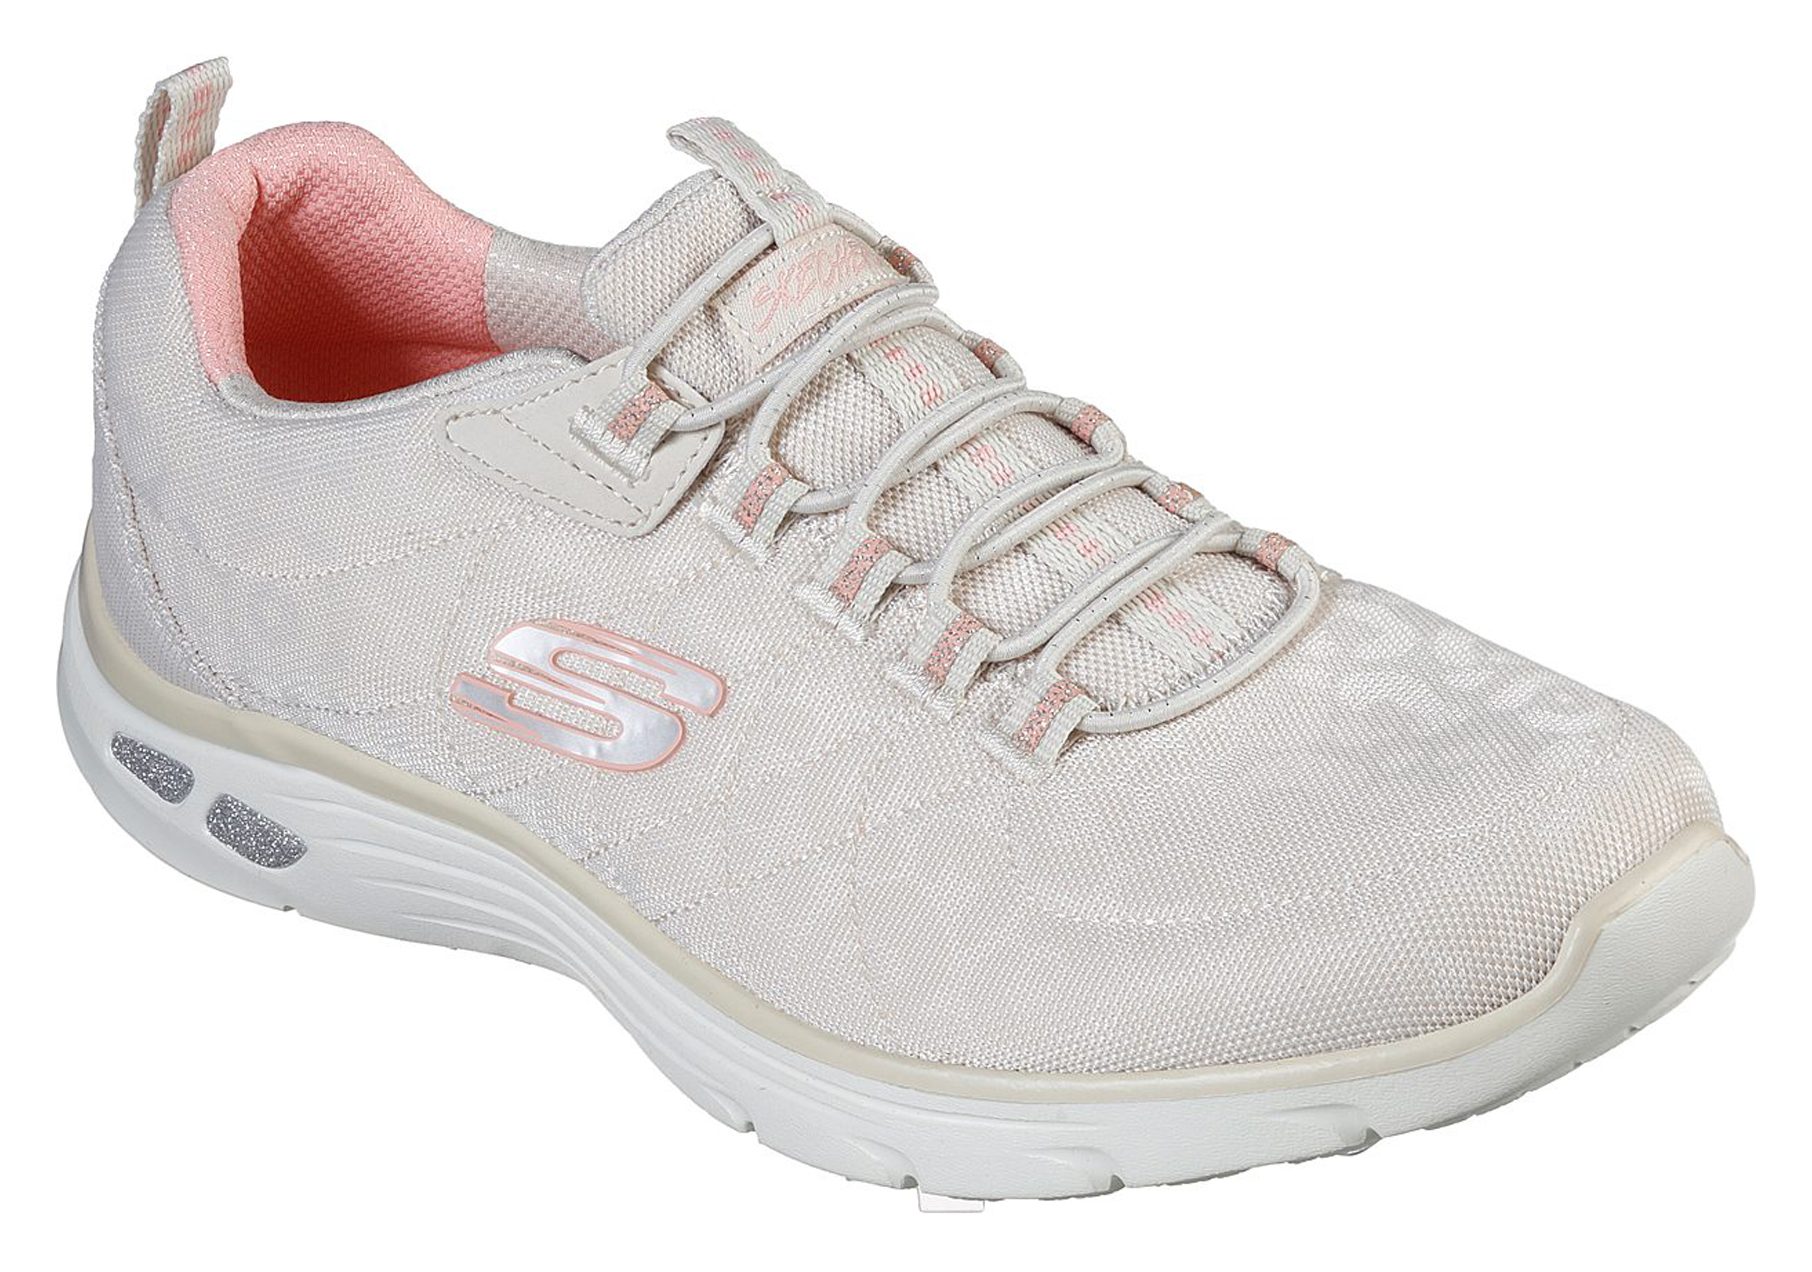 Skechers Relaxed Fit: Empire D'Lux - Spotted Natural 12825 NAT - Womens ...